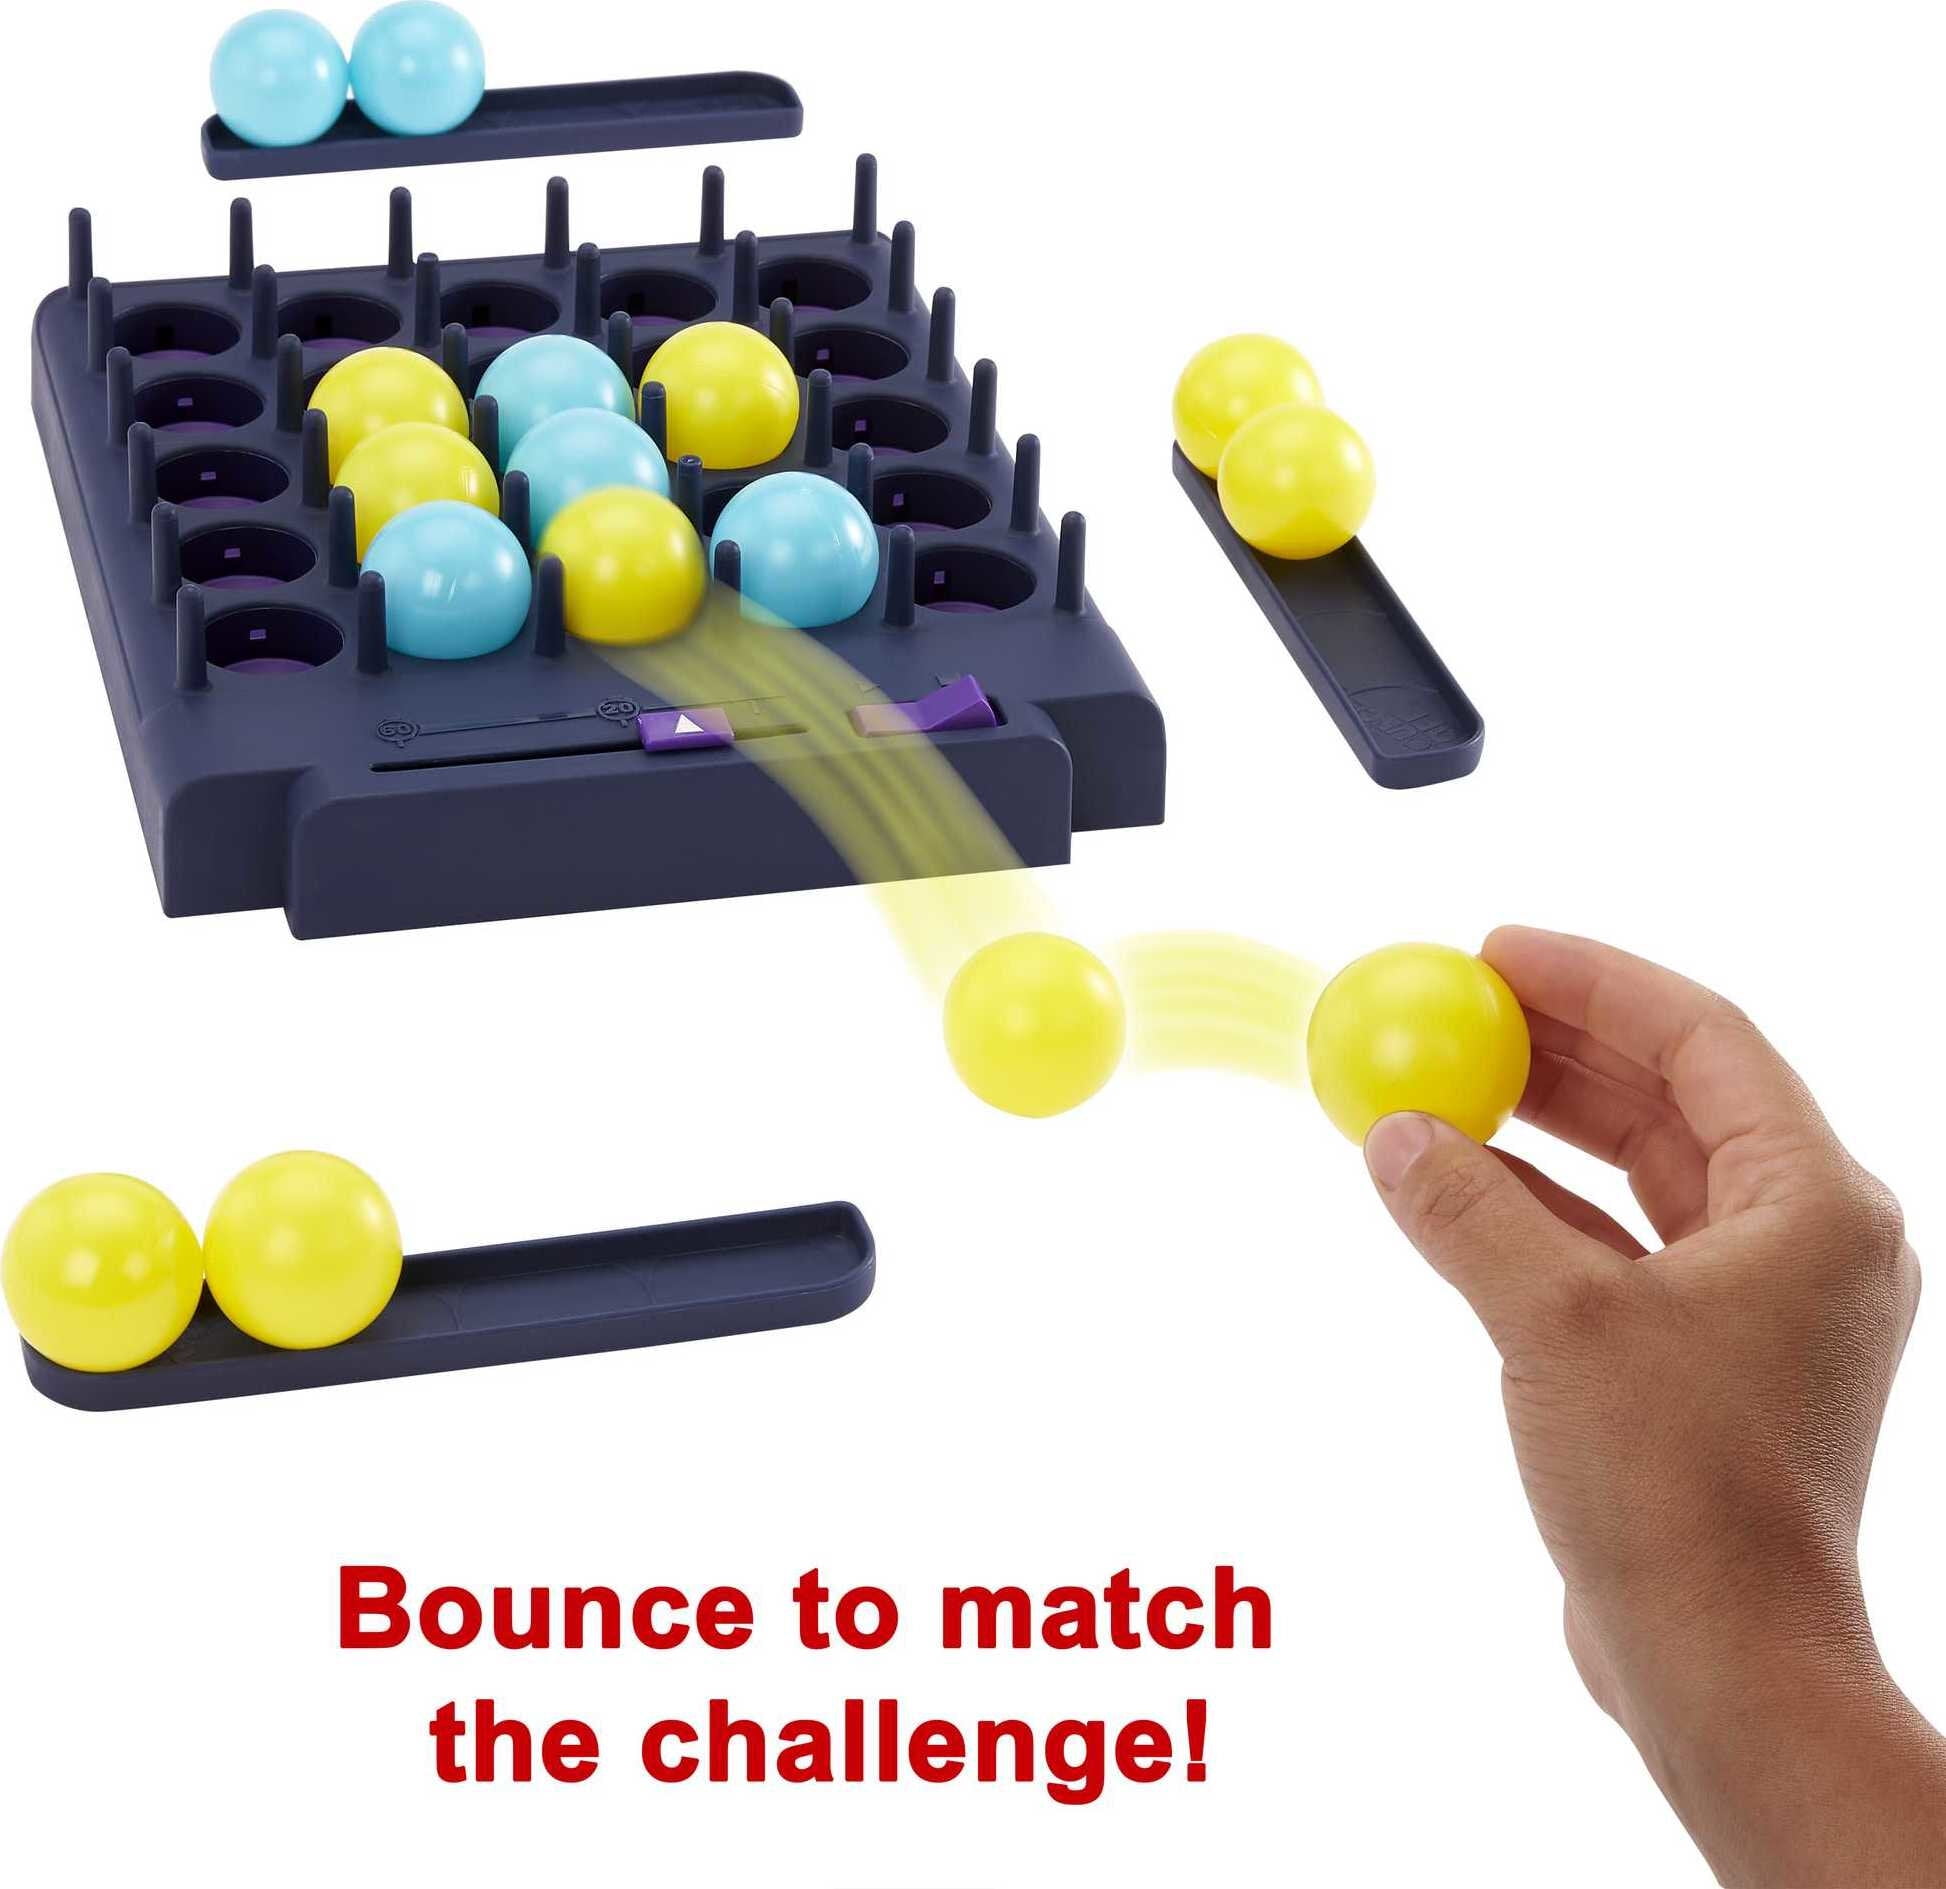 Bounce and Collect - Jogo Gratuito Online